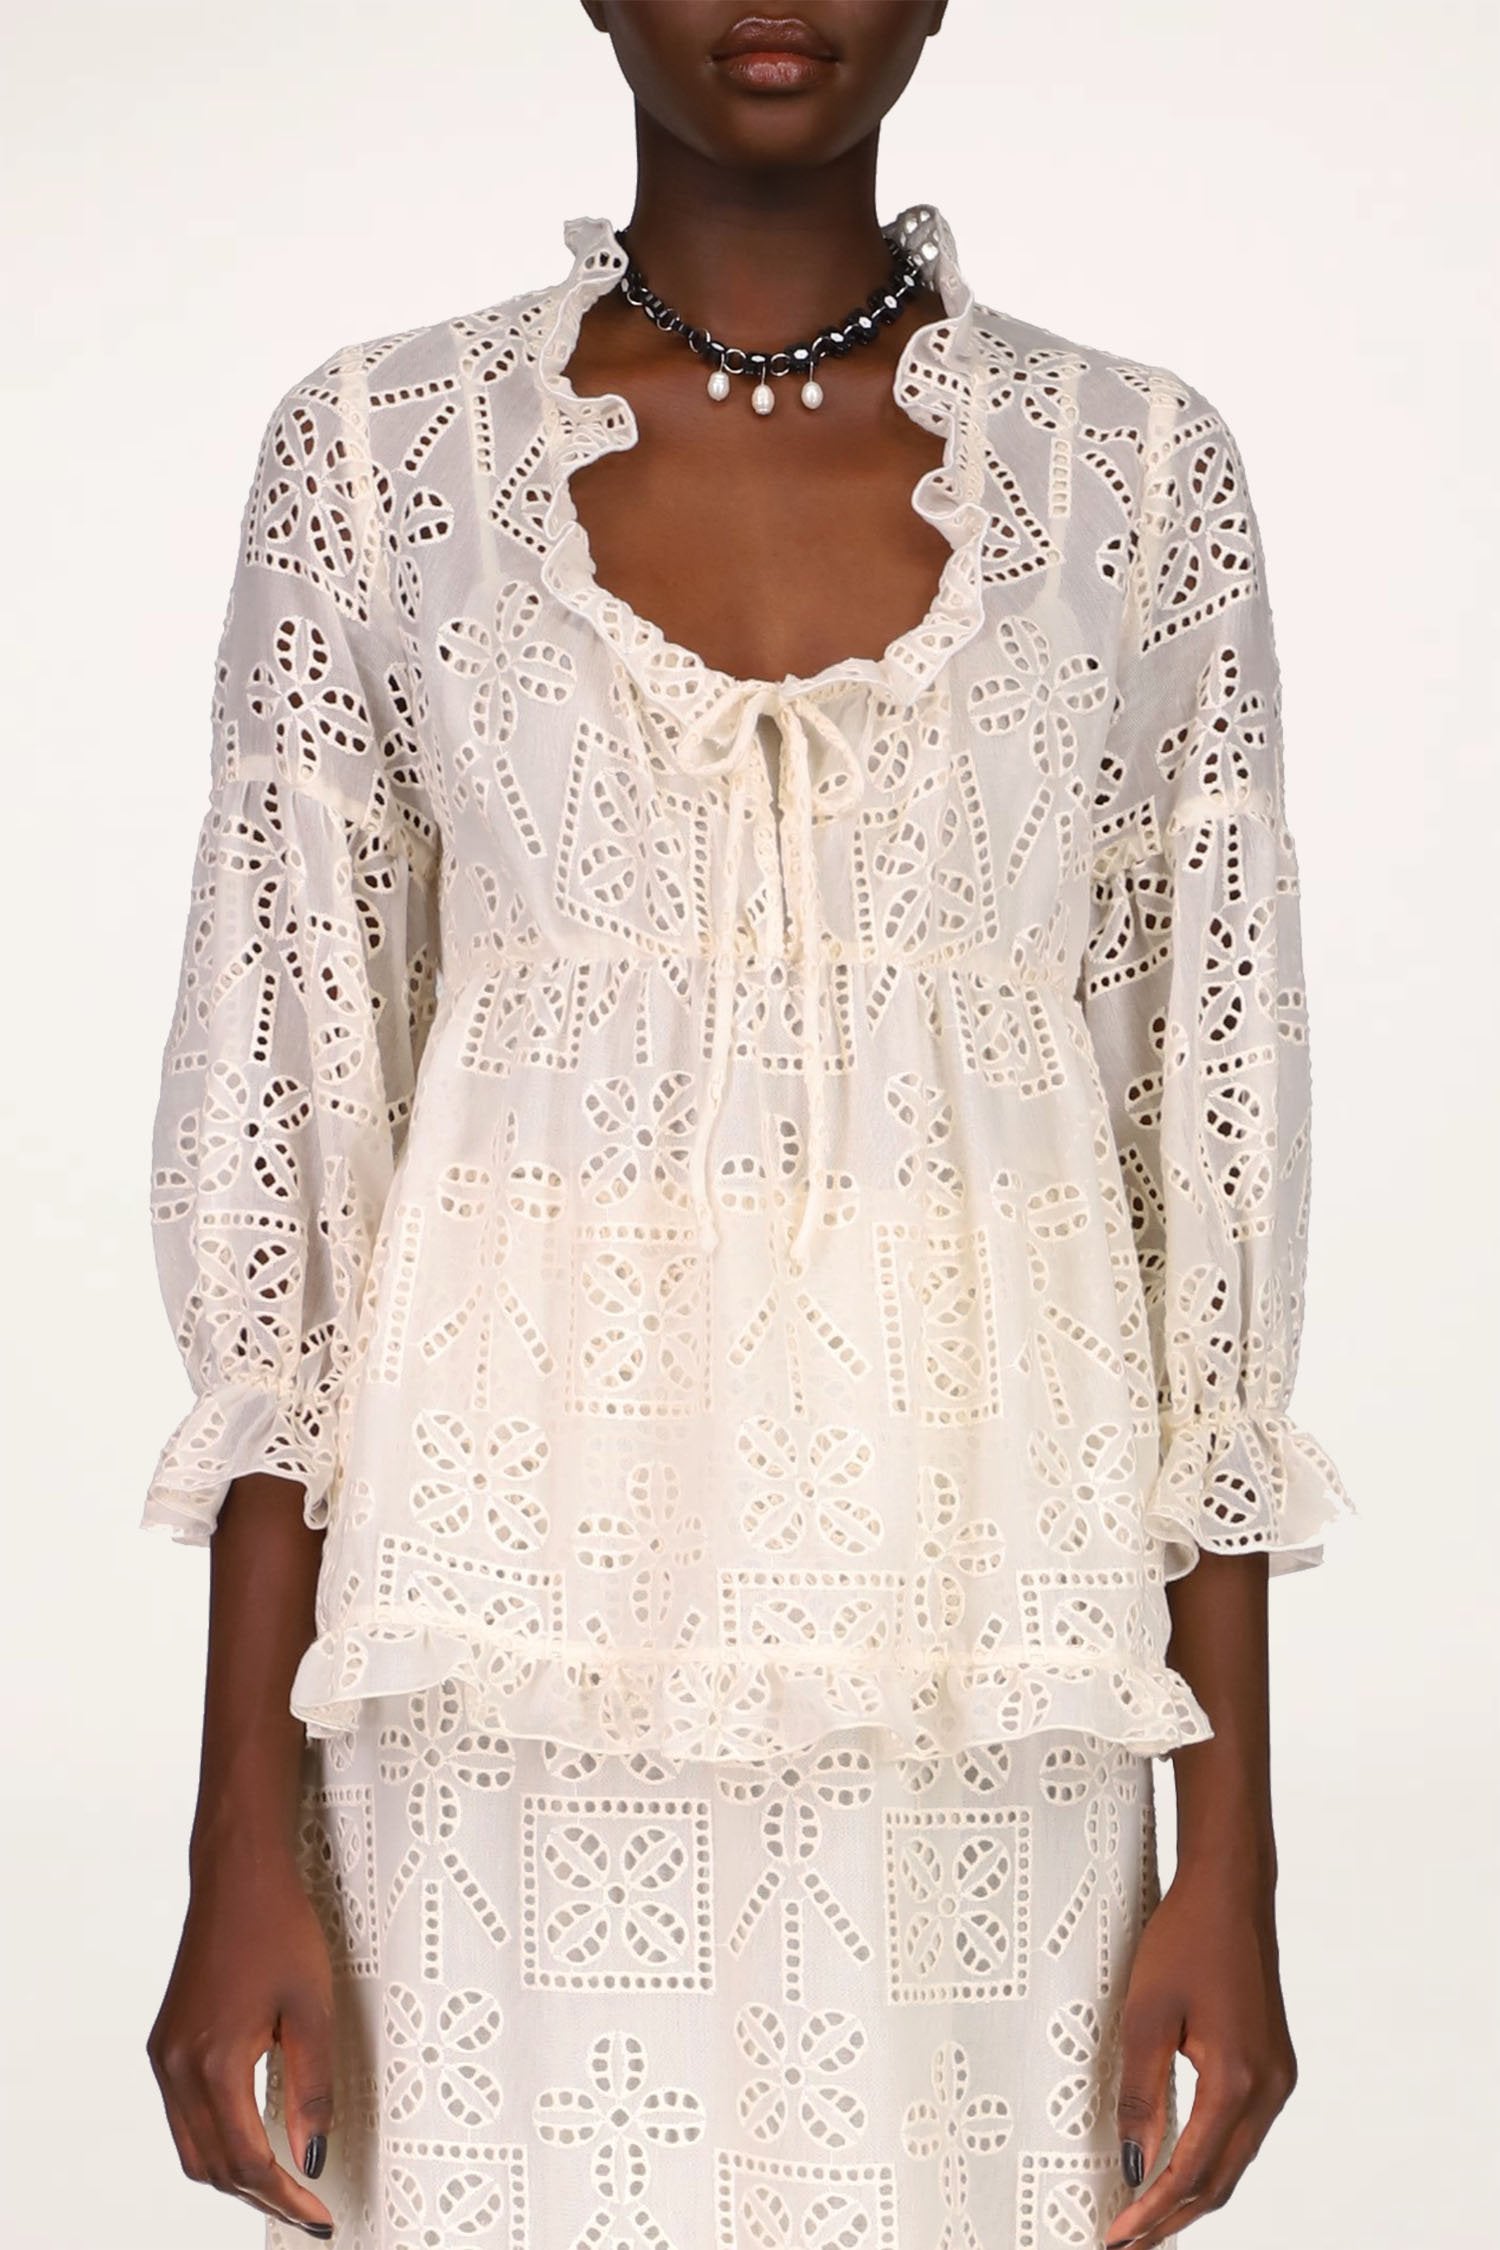 Aesthetic Eyelet Top Cream Stylized flowers with cutouts, and dotted cutouts lines